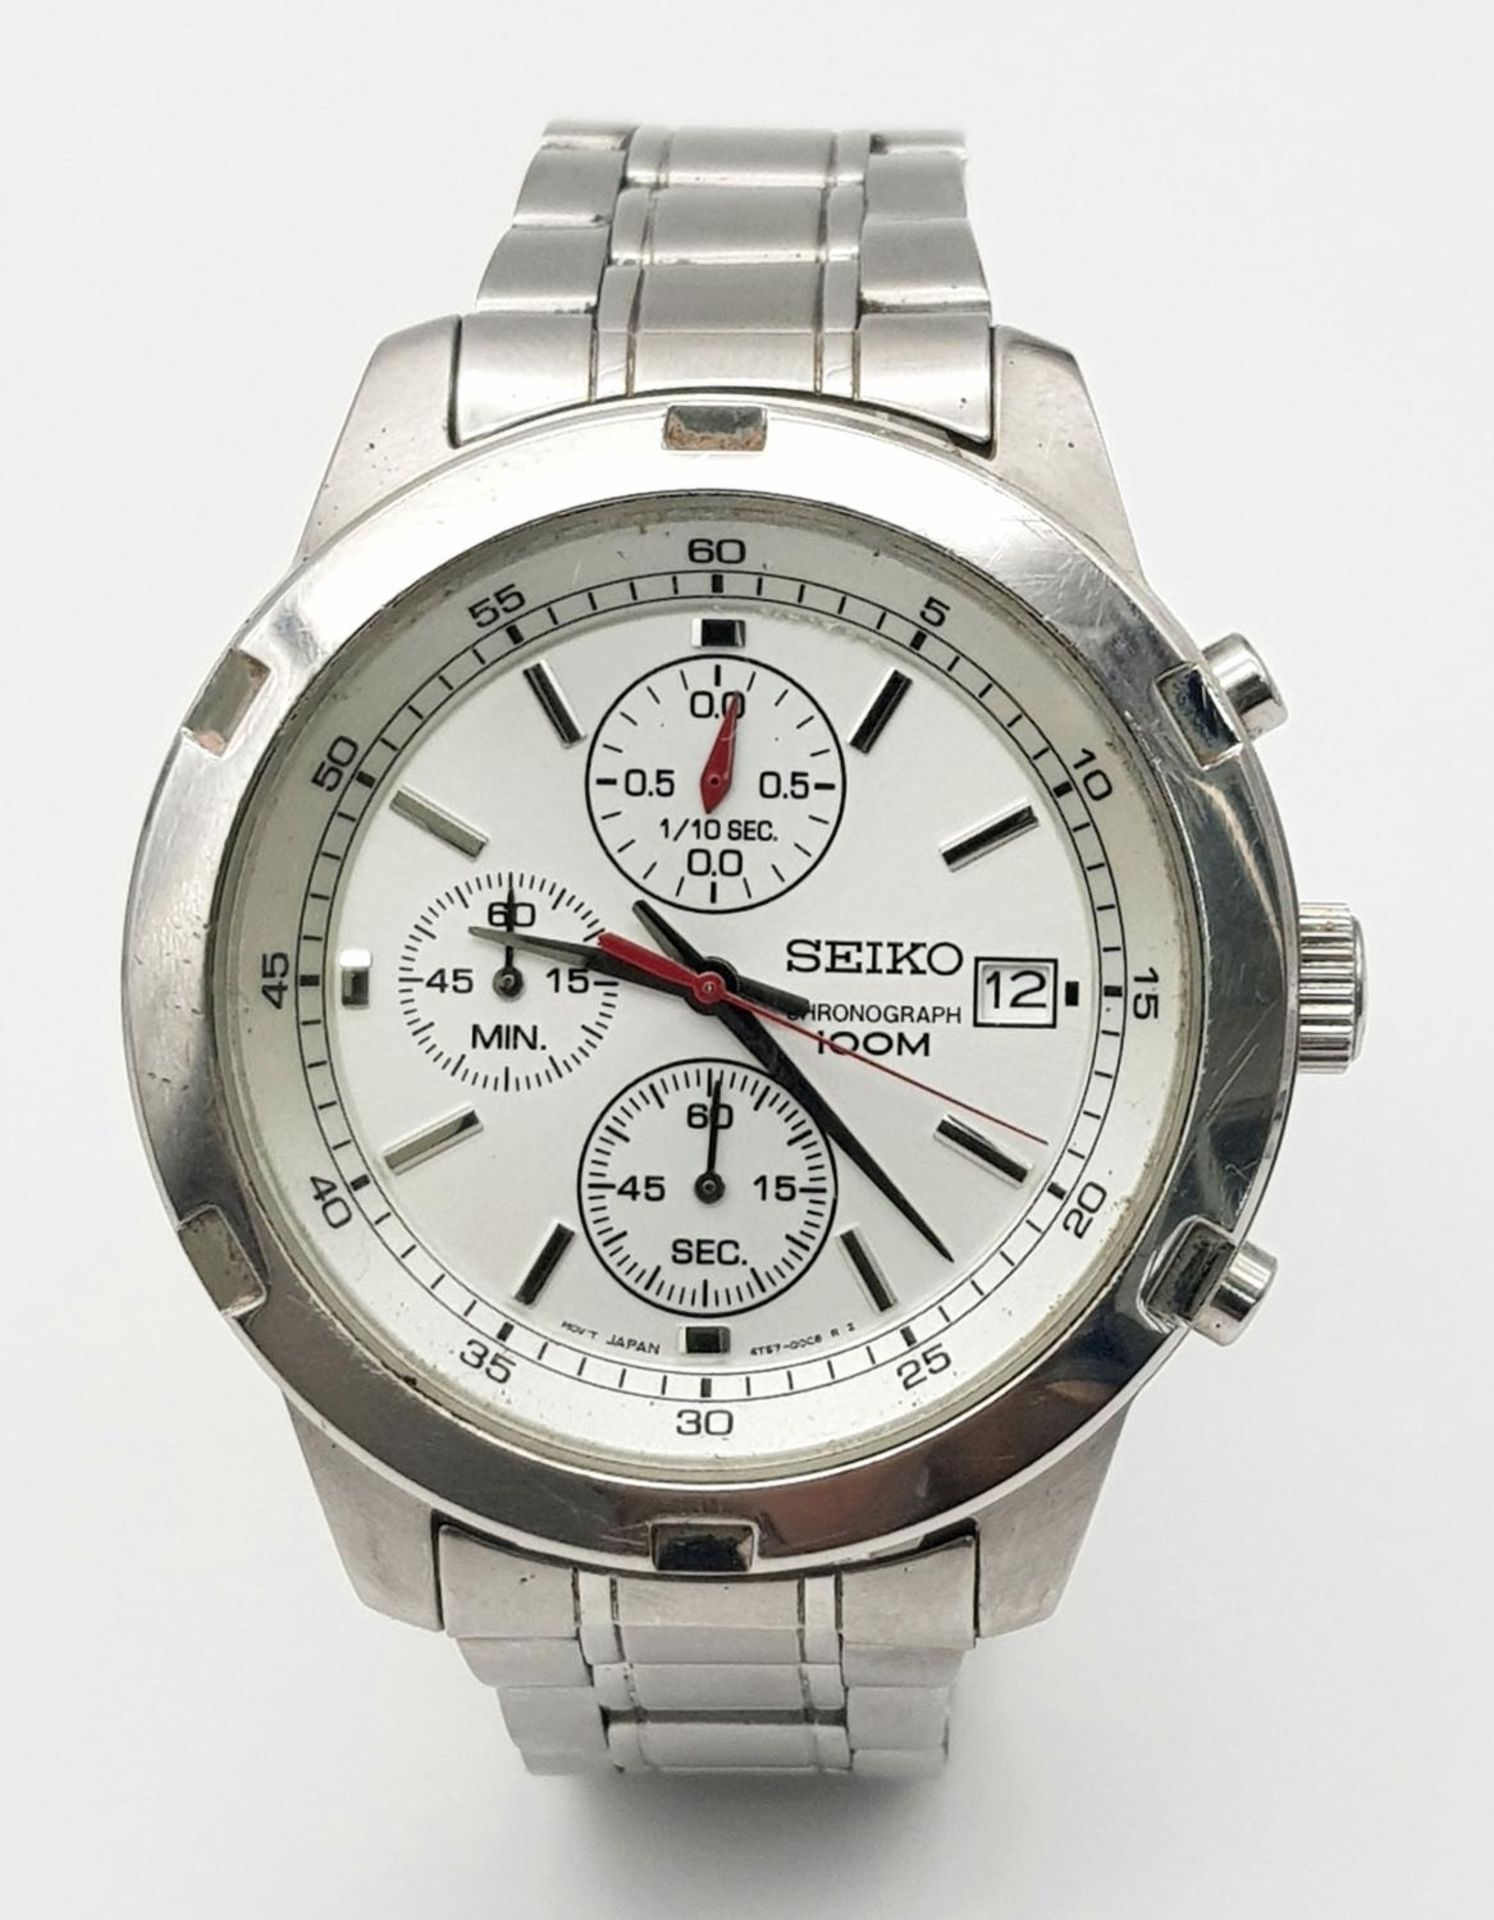 A Seiko 5 Chronograph Quartz Gents Watch. Stainless steel bracelet and case - 43mm. White dial